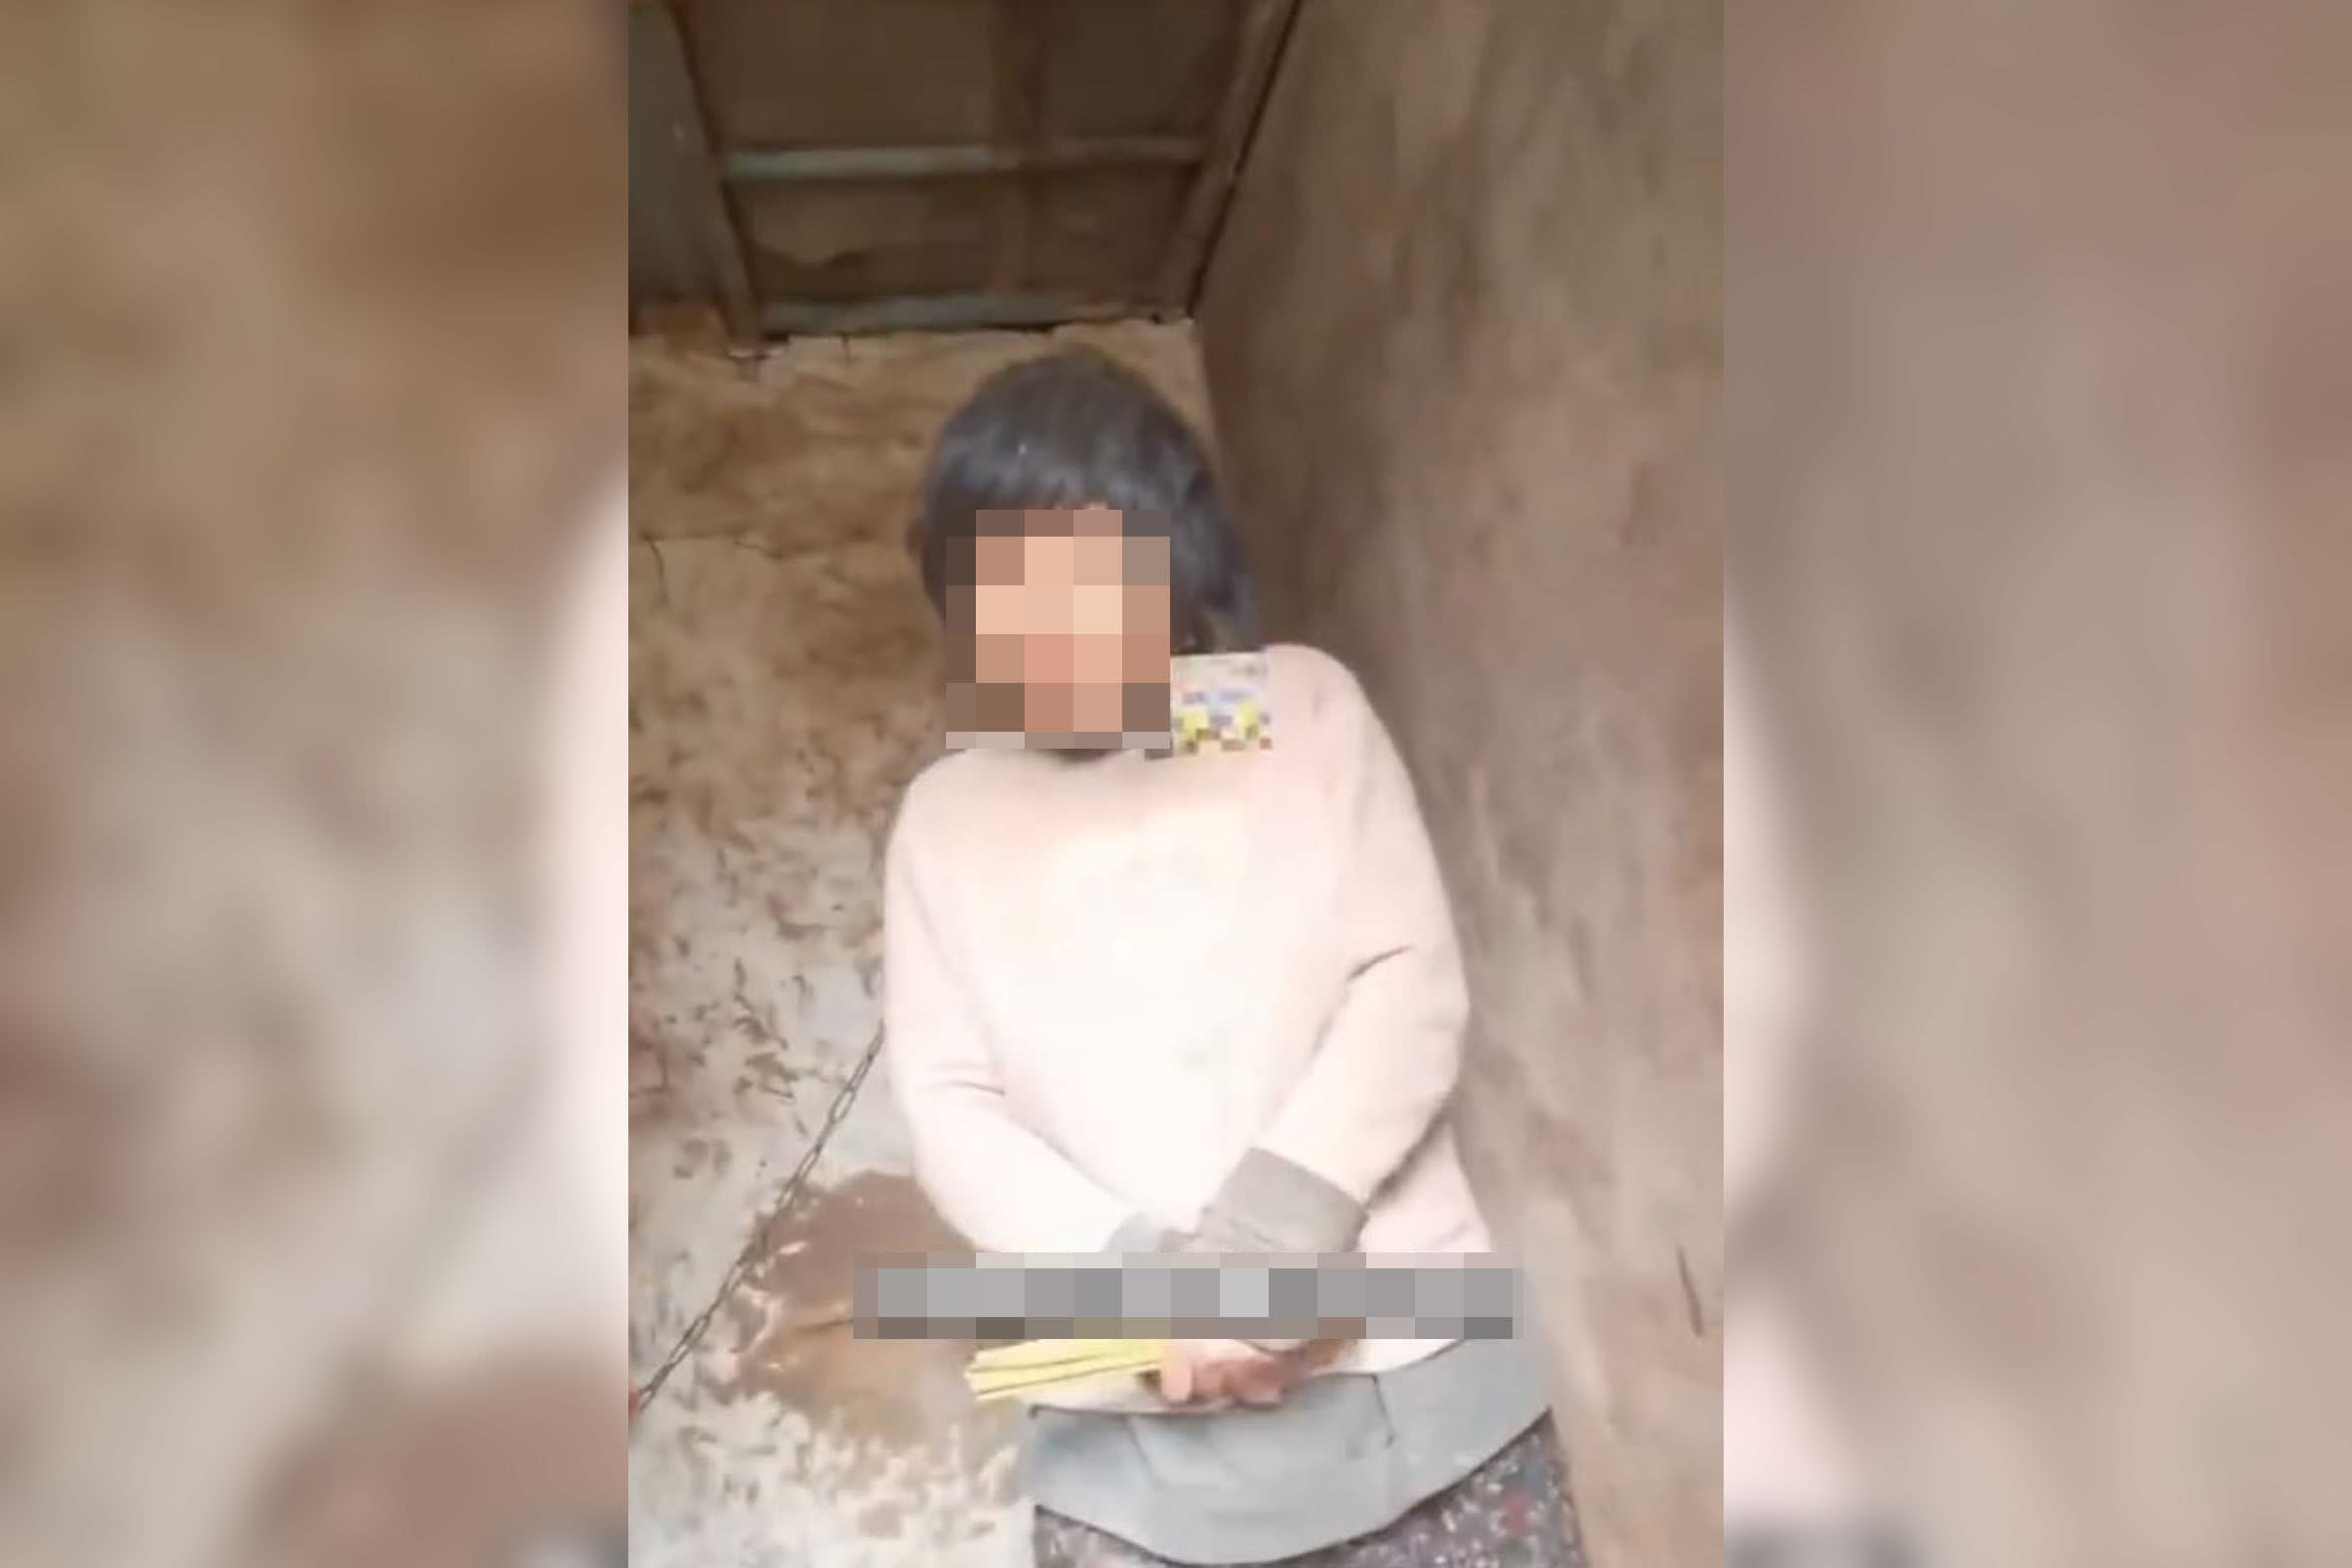 The video, which came to light in late January, was seen by millions of people online and caused an outcry about the treatment of women in China and less discussed issues such as the trafficking of brides.